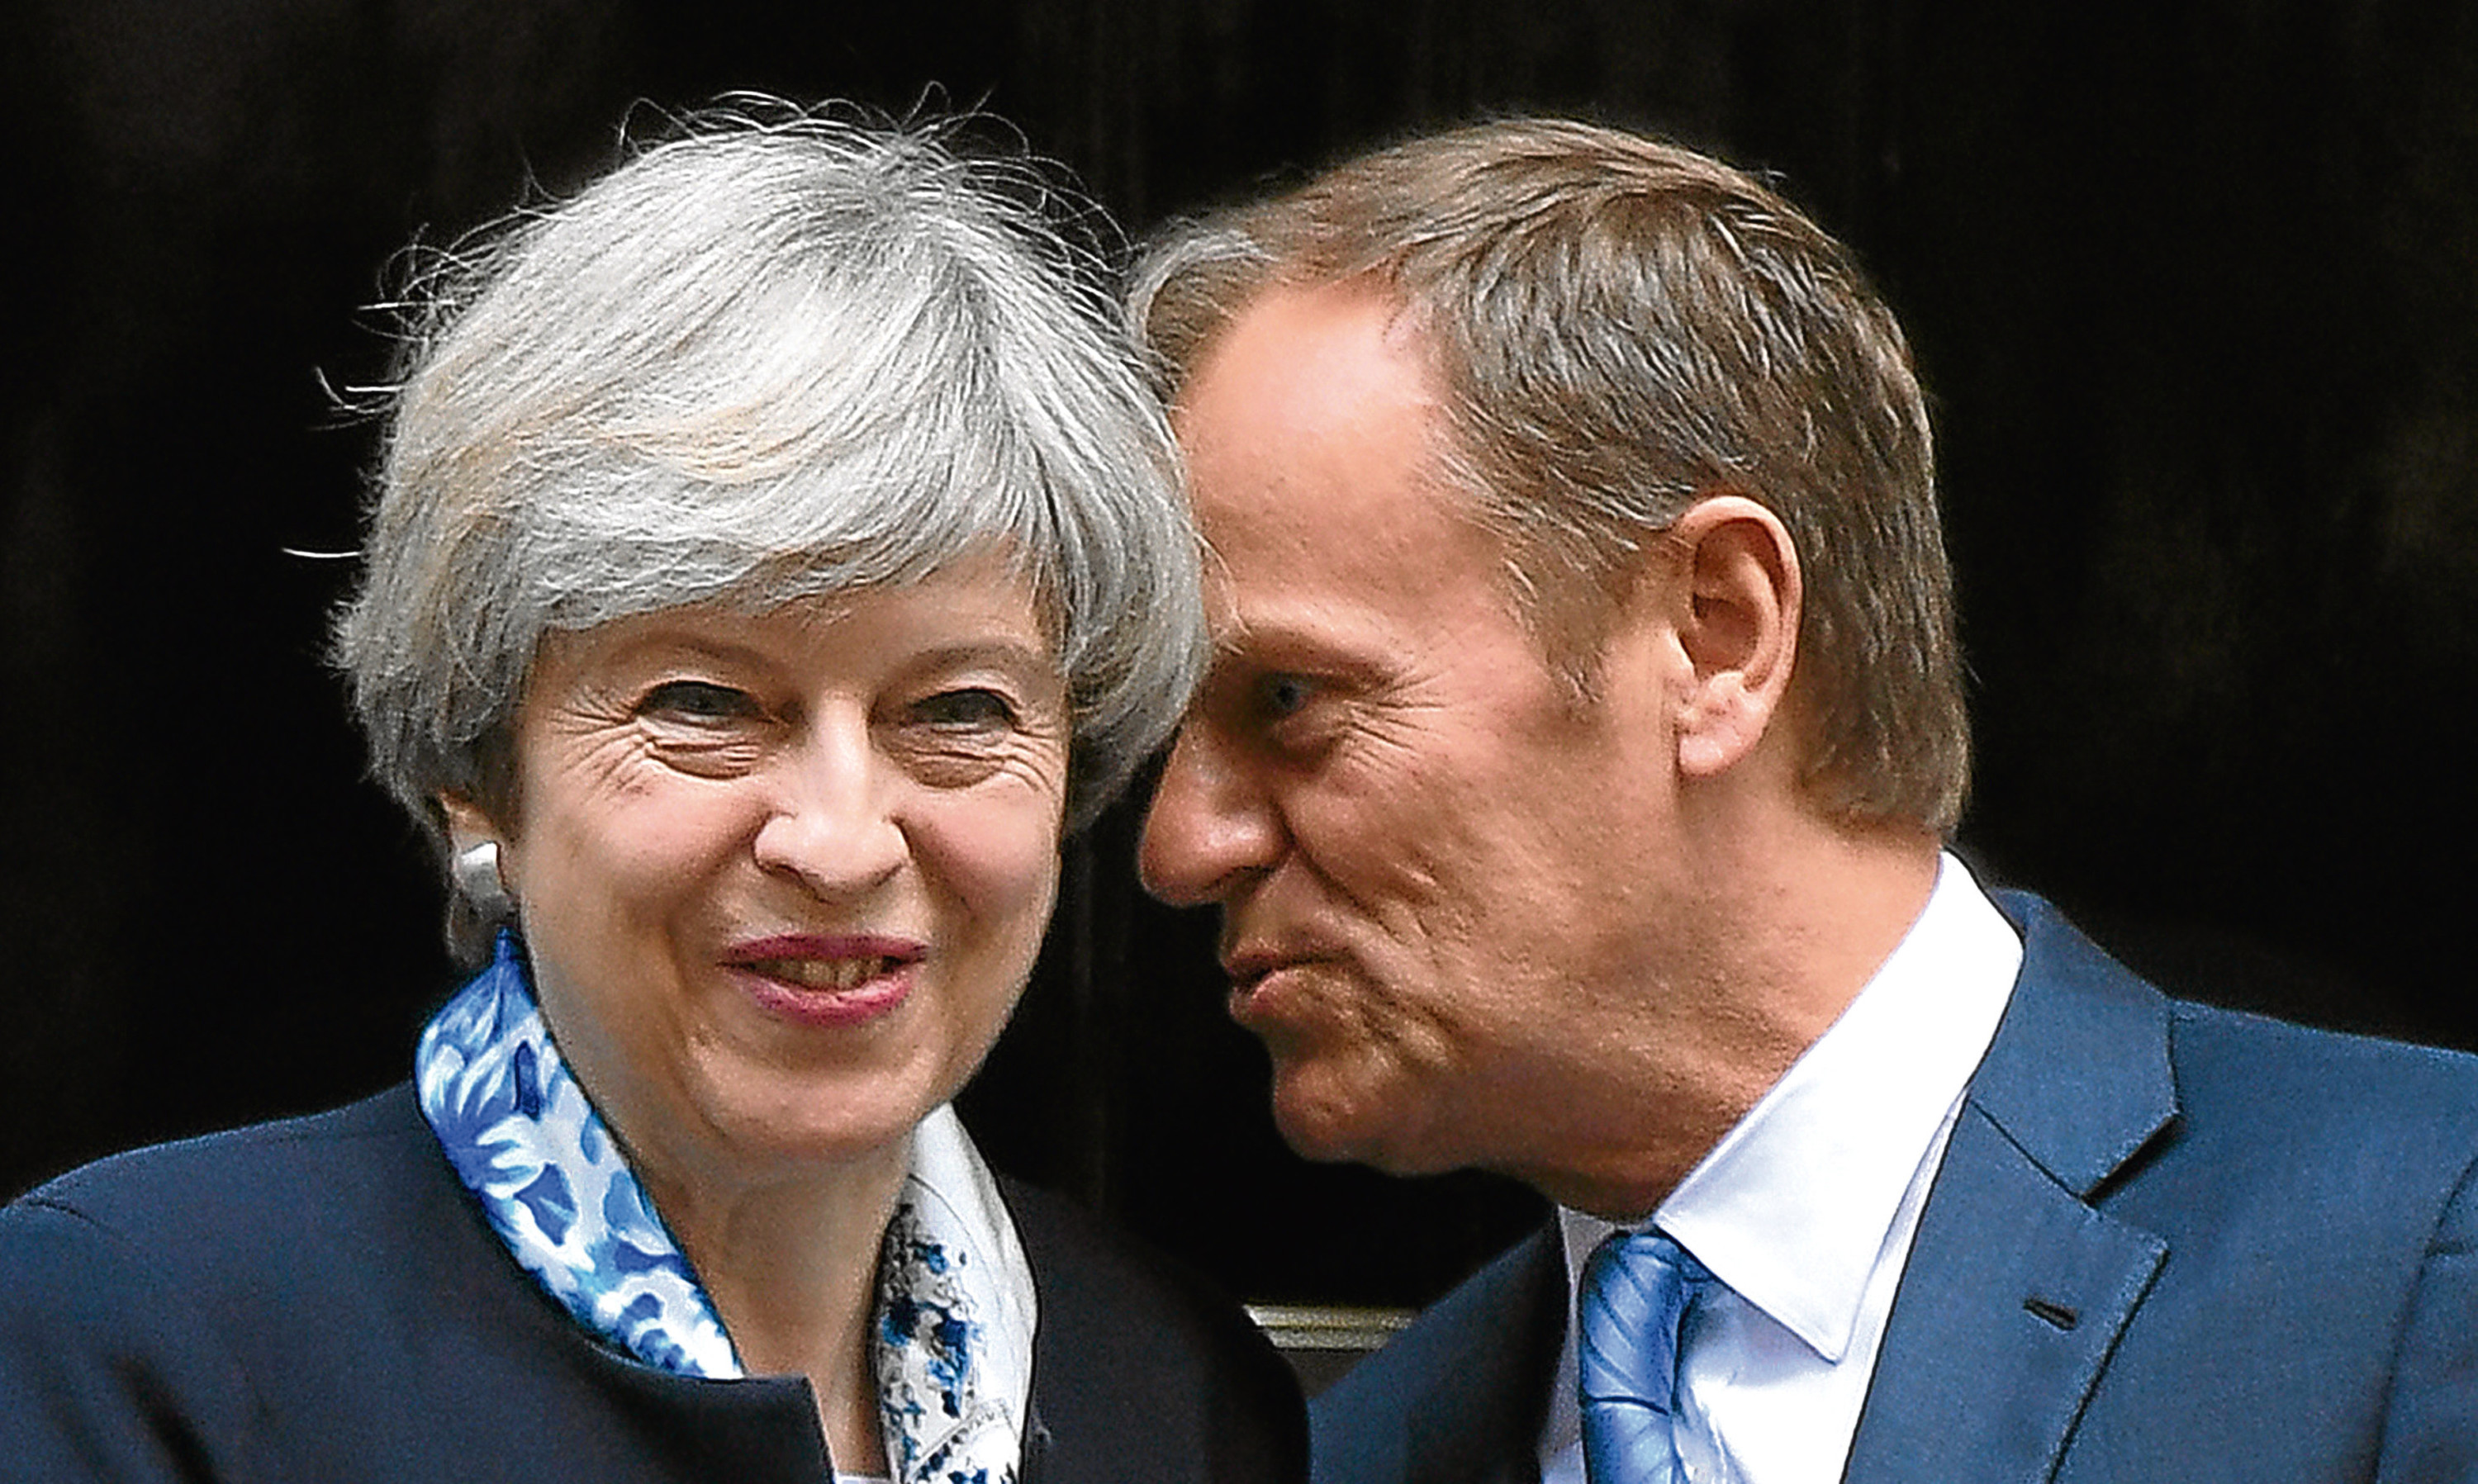 It's sweetness and light now between Theresa May and European Council president Donald Tusk but how long will that stay the case through the Brexit talks?